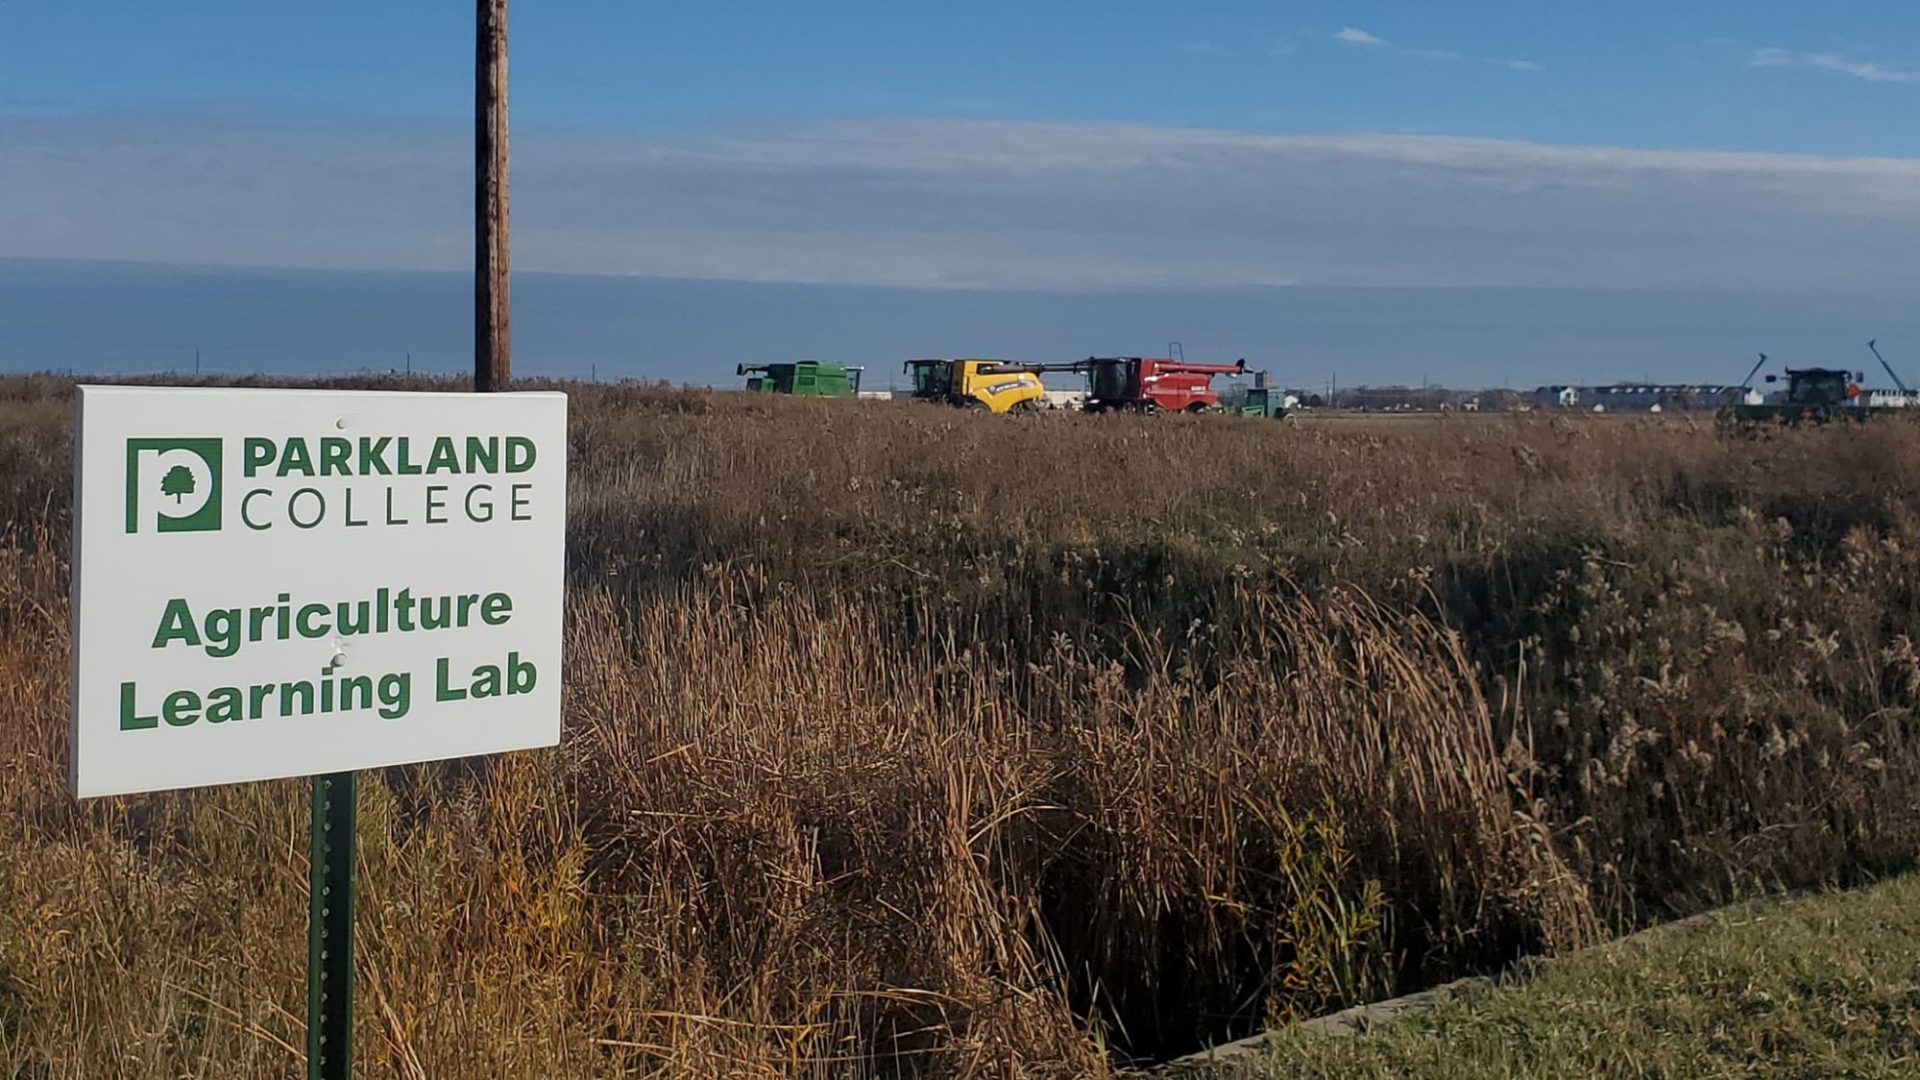 A large farm field with farm machinery in the background. There is a sign in the foreground that is white and says Parkland College Agriculture Learning Lab in green.